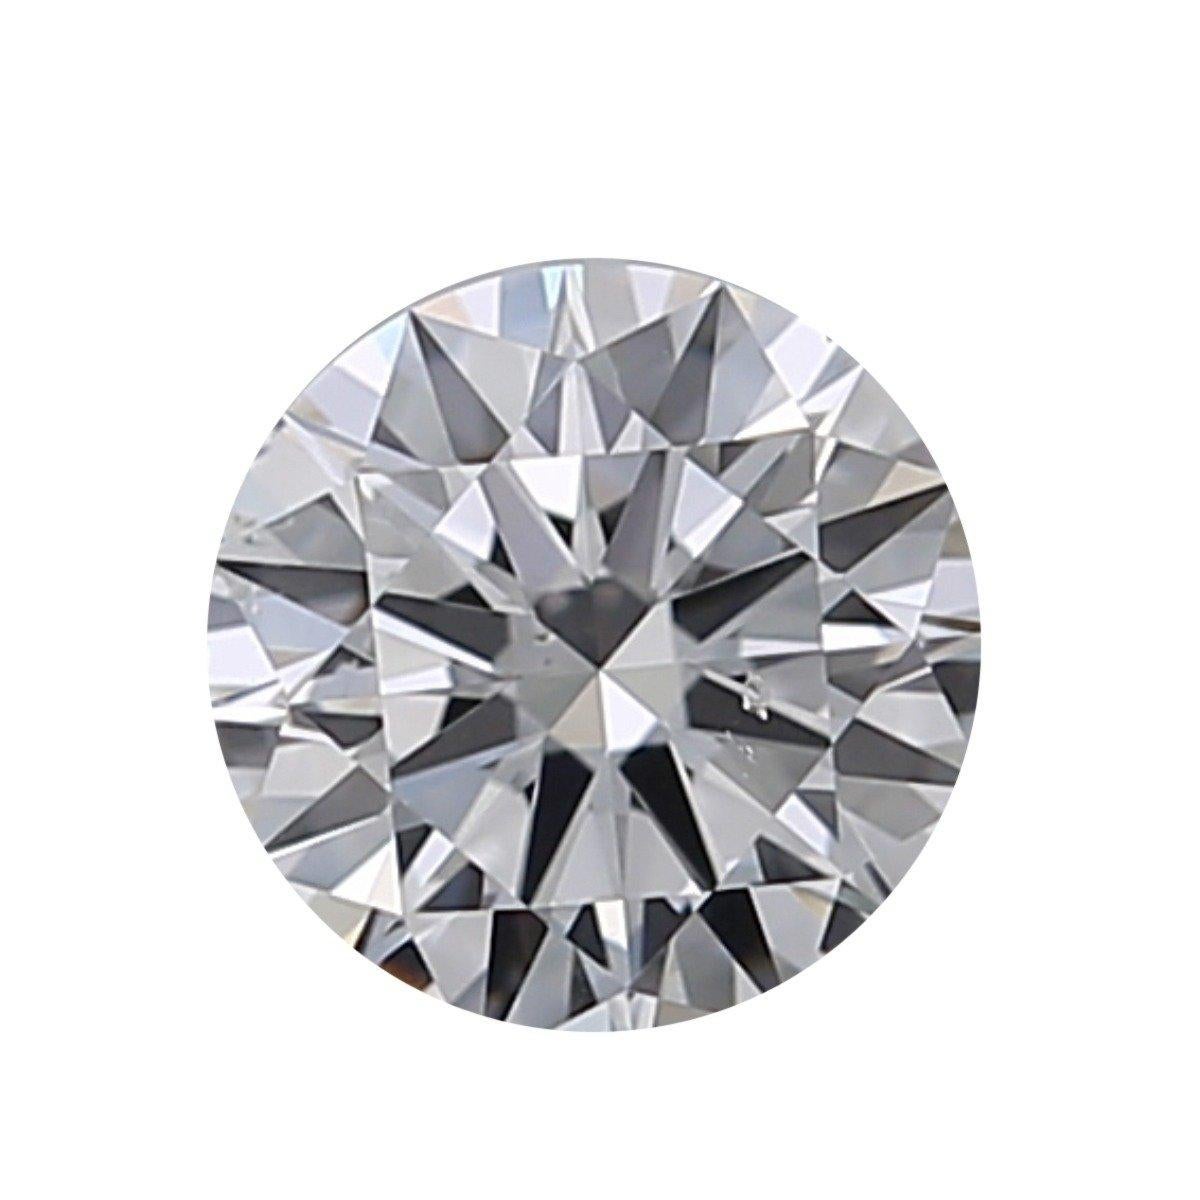 1 Pc Natural Diamond, 0.21 Ct, Round, D 'Colourless', SI1, GIA Certificate